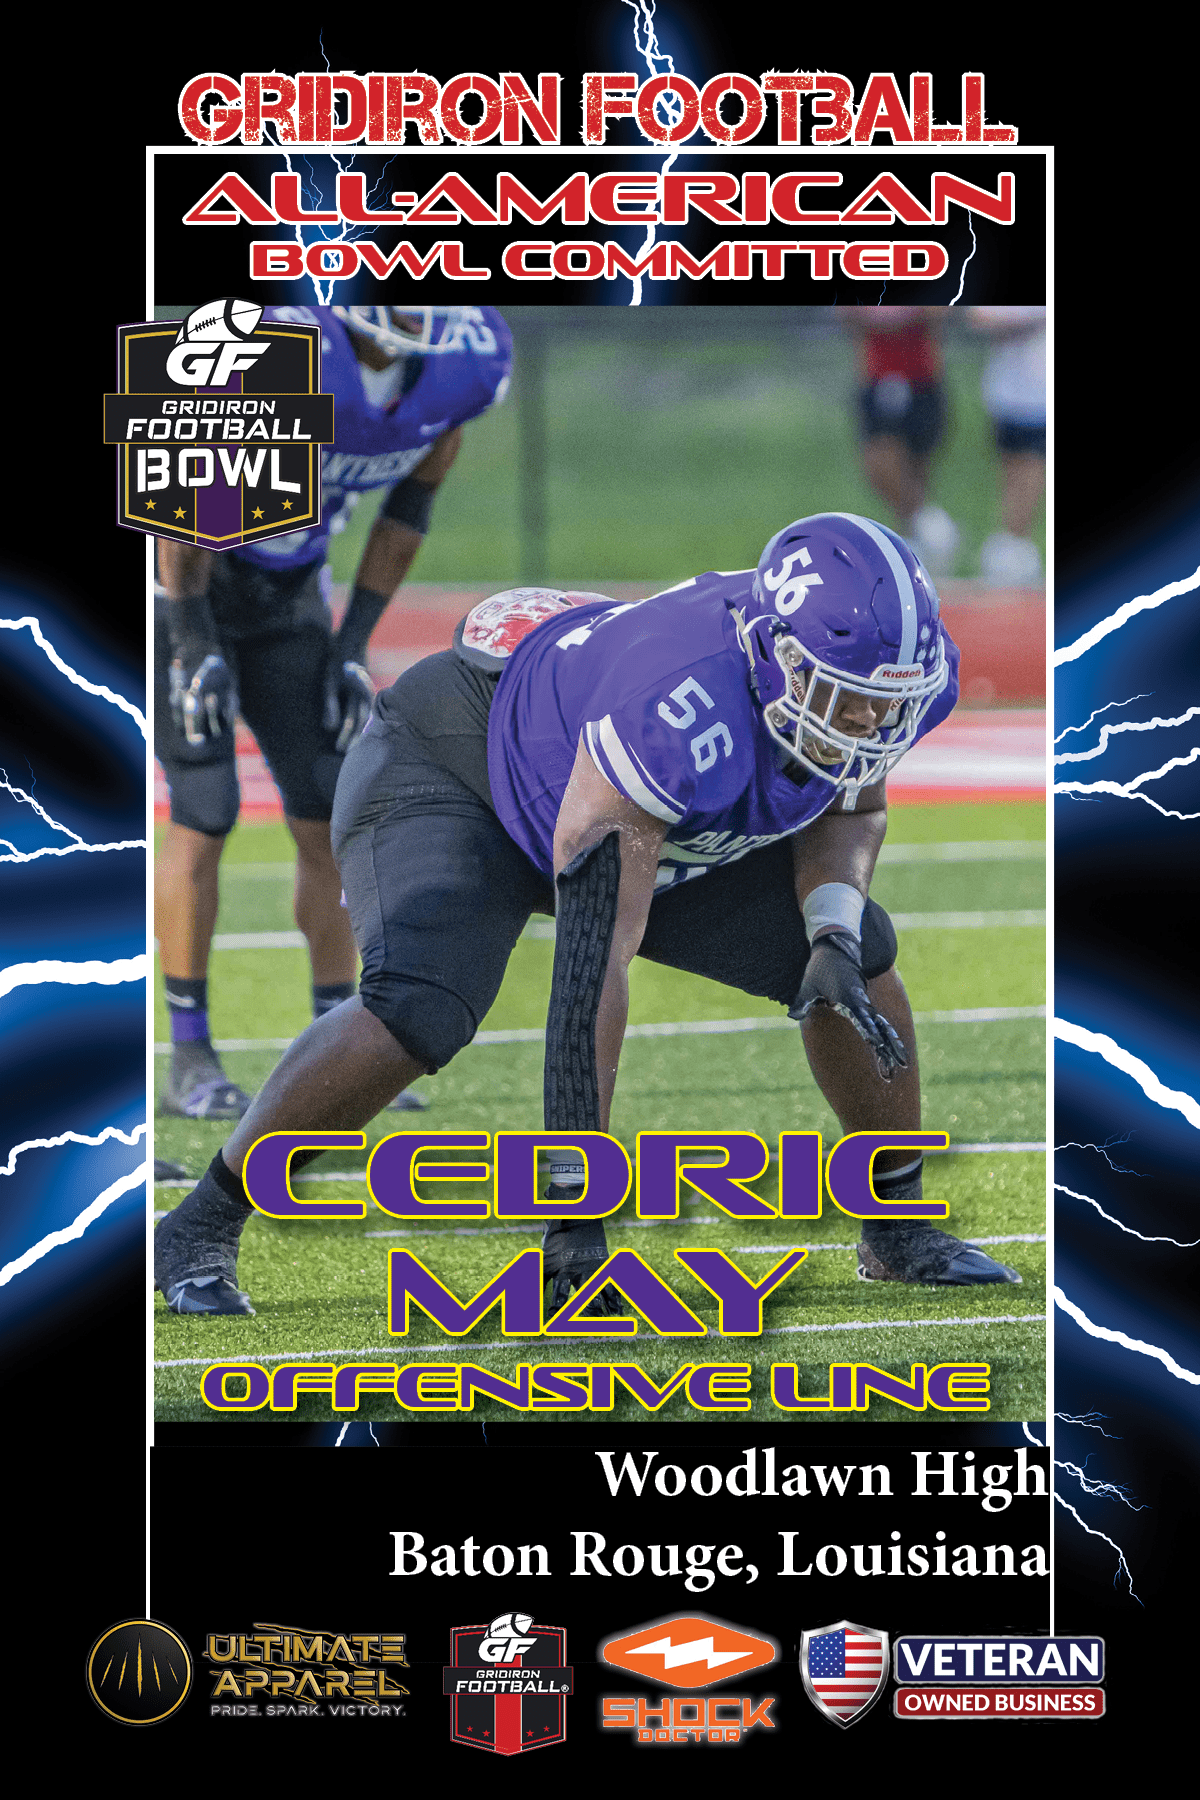 BREAKING NEWS: Woodlawn High School (Baton Rouge, LA) OL Cedric May Commits To The Gridiron Football All-American Bowl Game